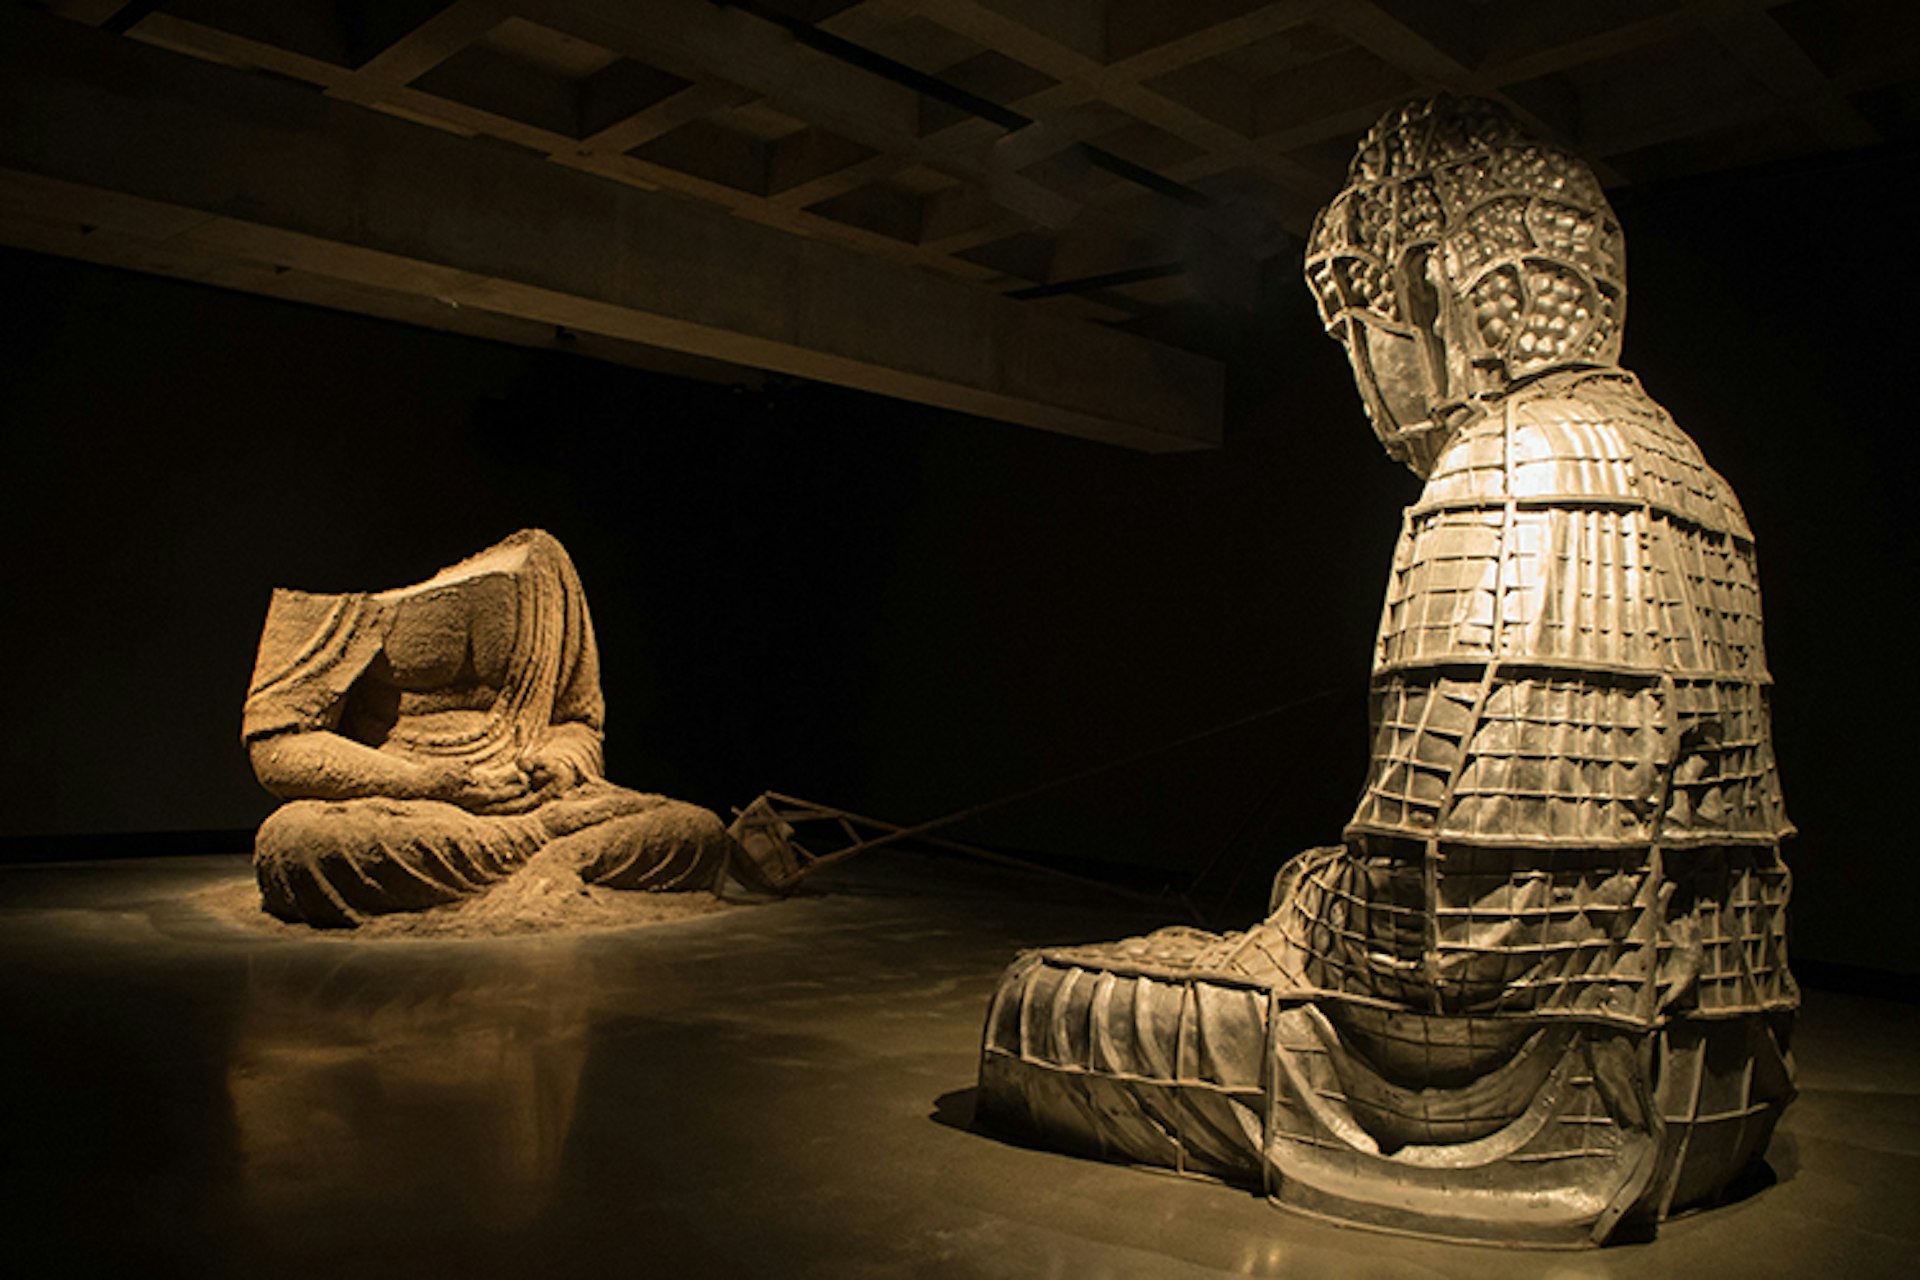 A sculpture of Buddha at the Museum of Old and New Art, Hobart